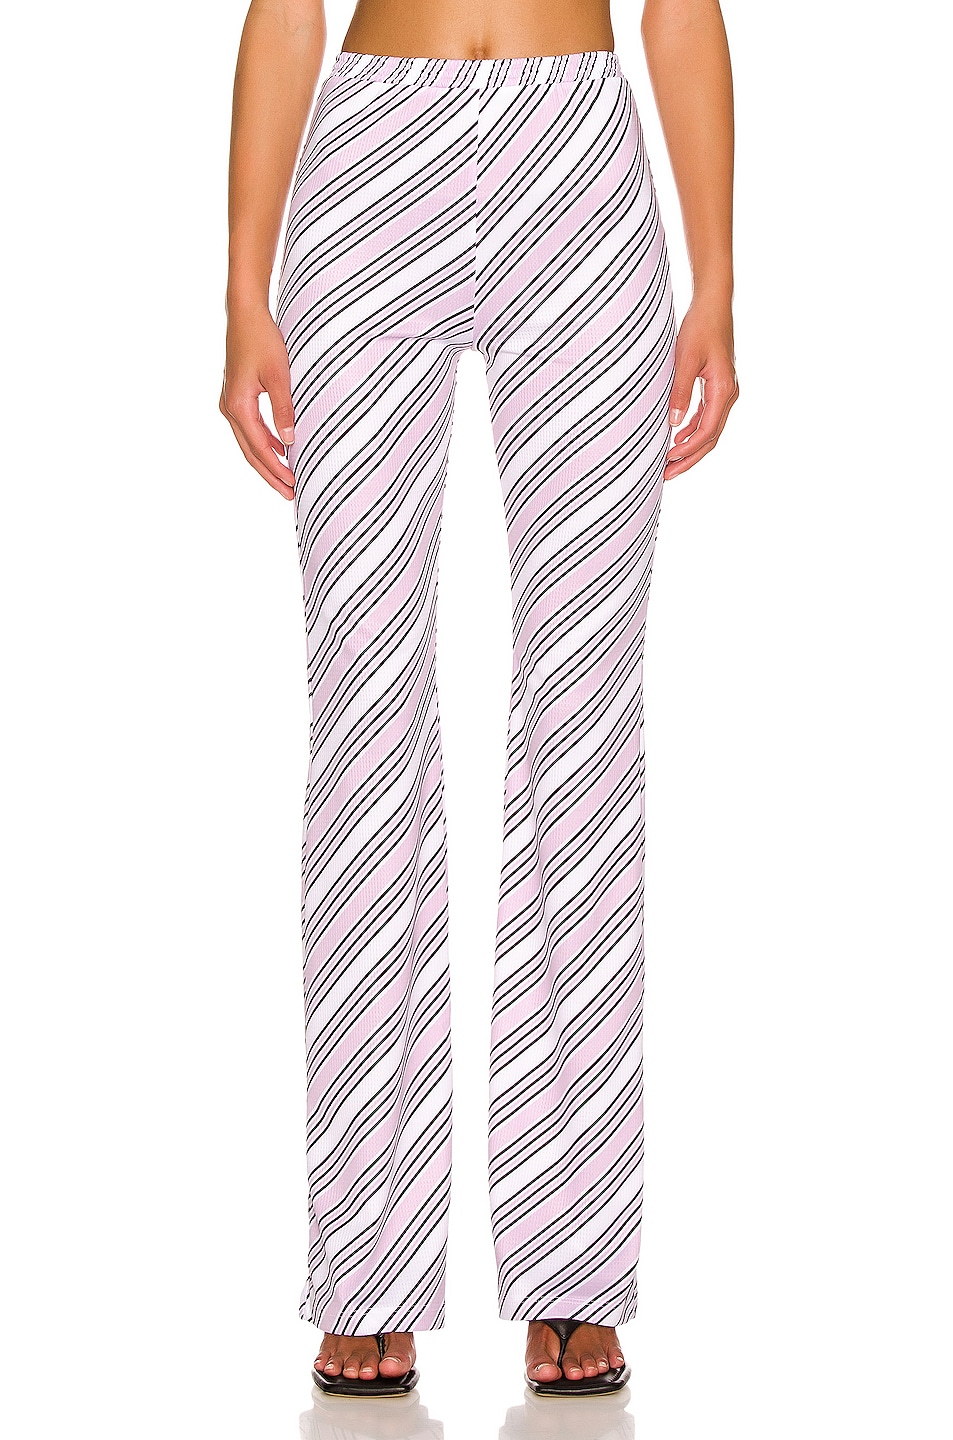 Image 1 of Maisie Wilen Contender Pant in Ribbon Stripe Pink